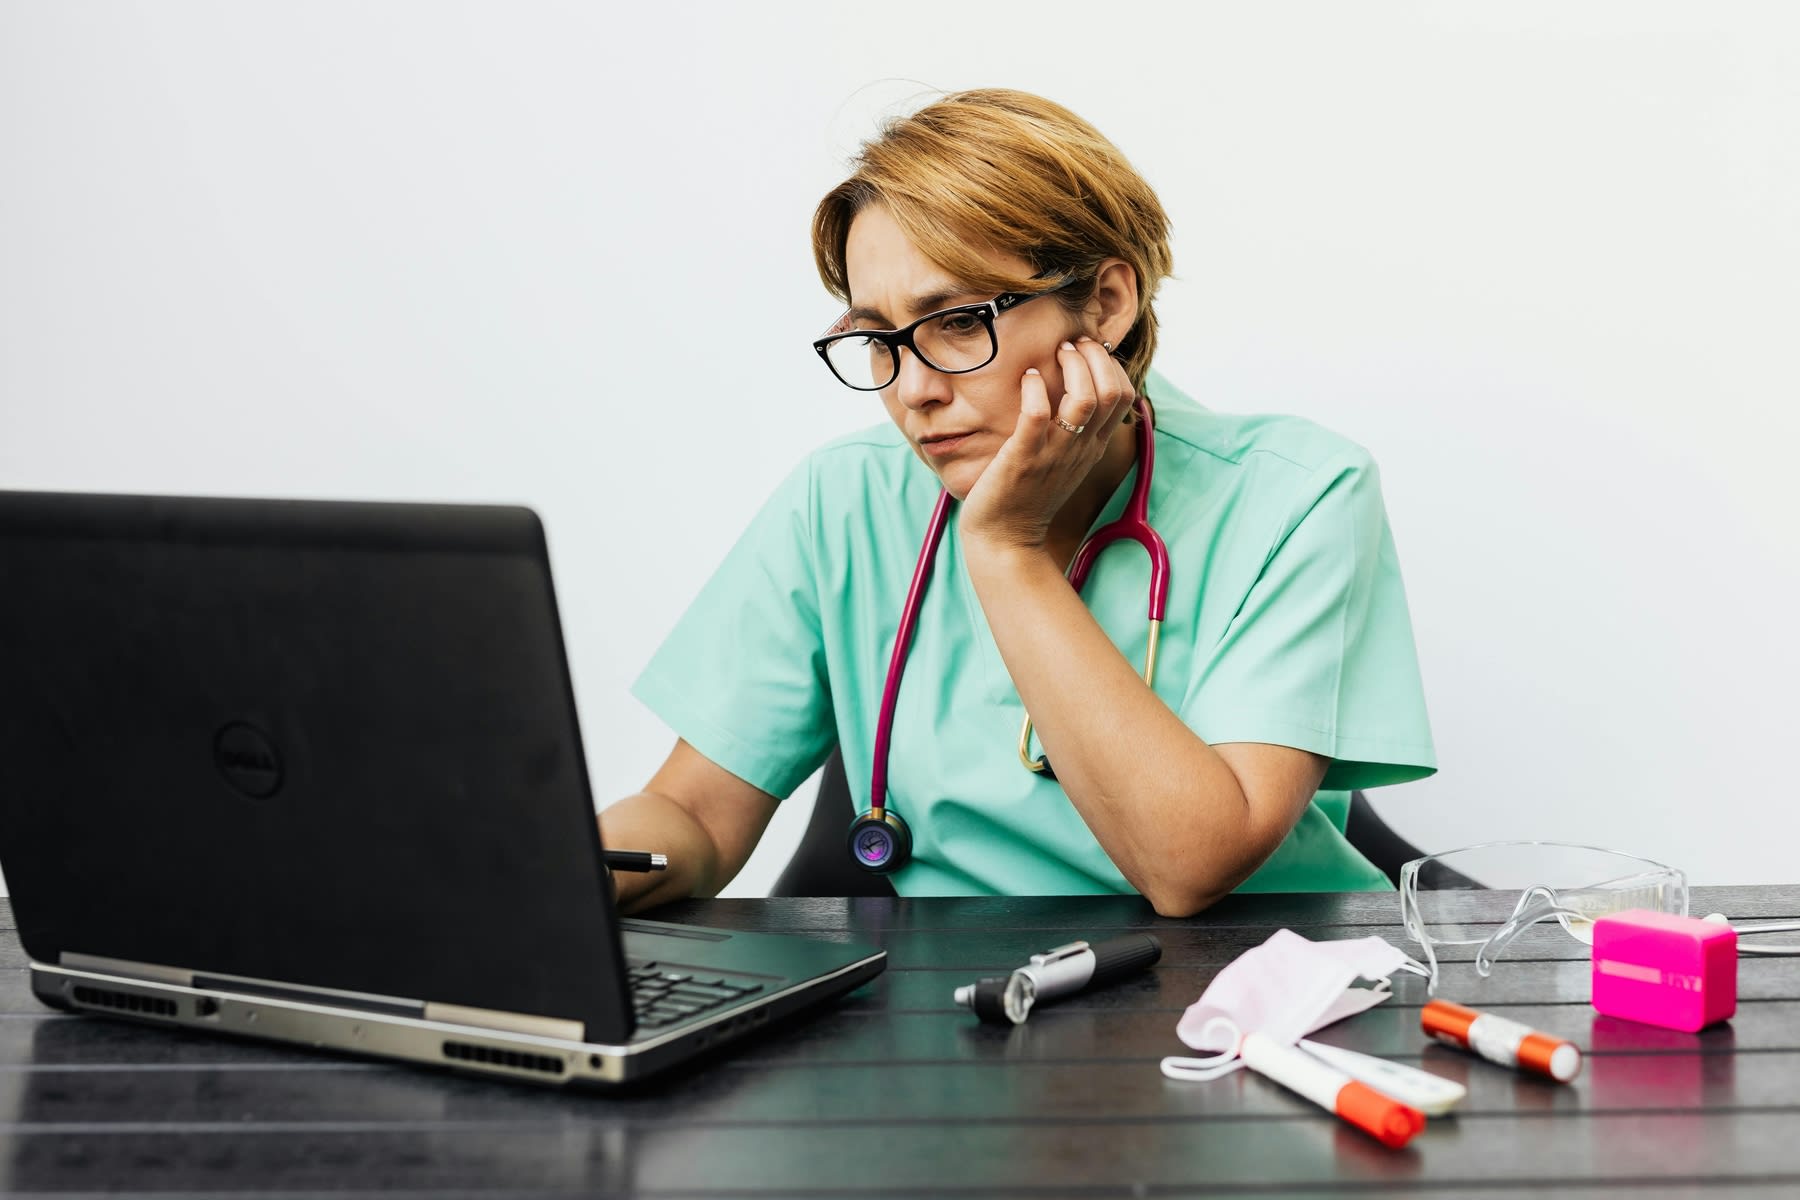 Female nurse with a stethoscope around her neck, browsing through her laptop at work